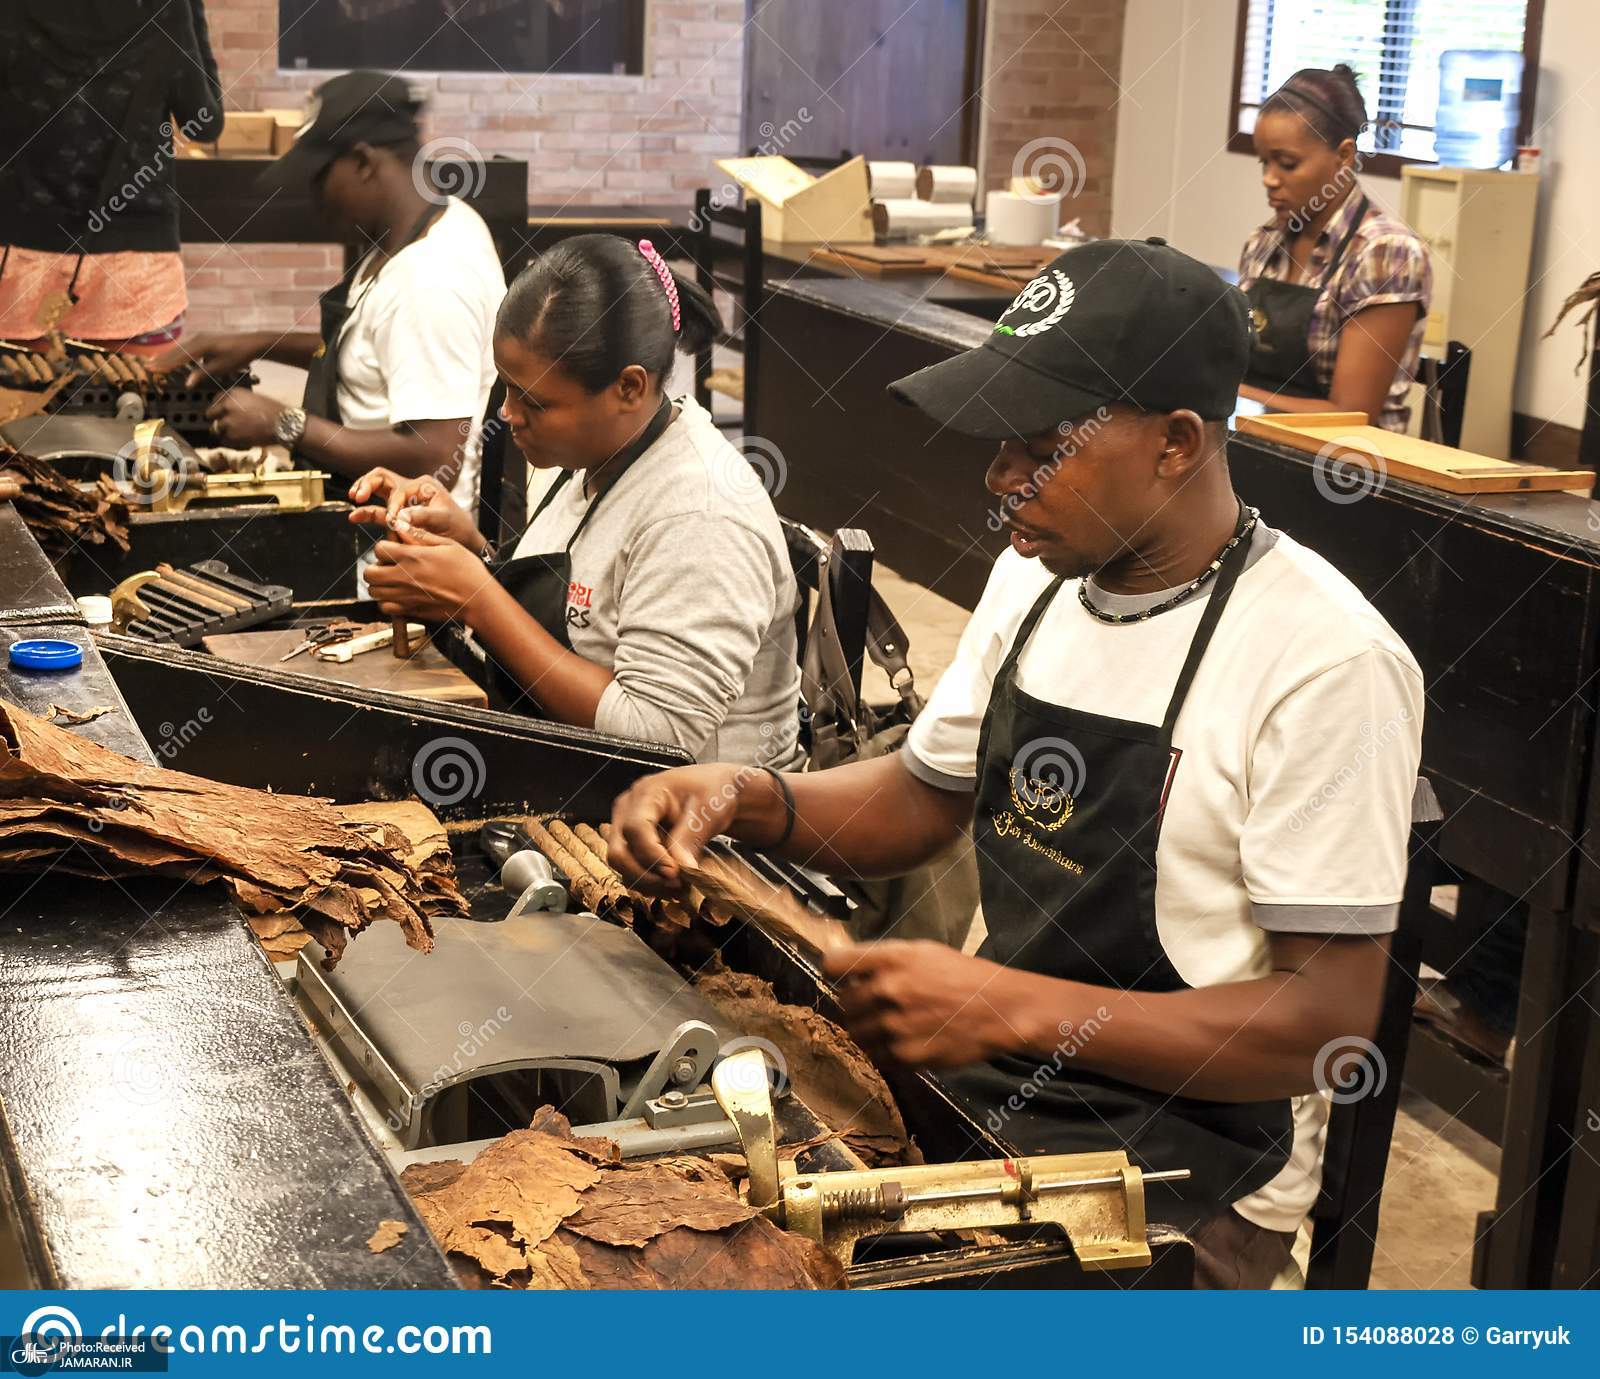 three-skilled-workers-sat-bench-hand-rolling-tobacco-leaf-quality-cuban-cigars-cigar-factory-havana-cuba-december-workers-154088028